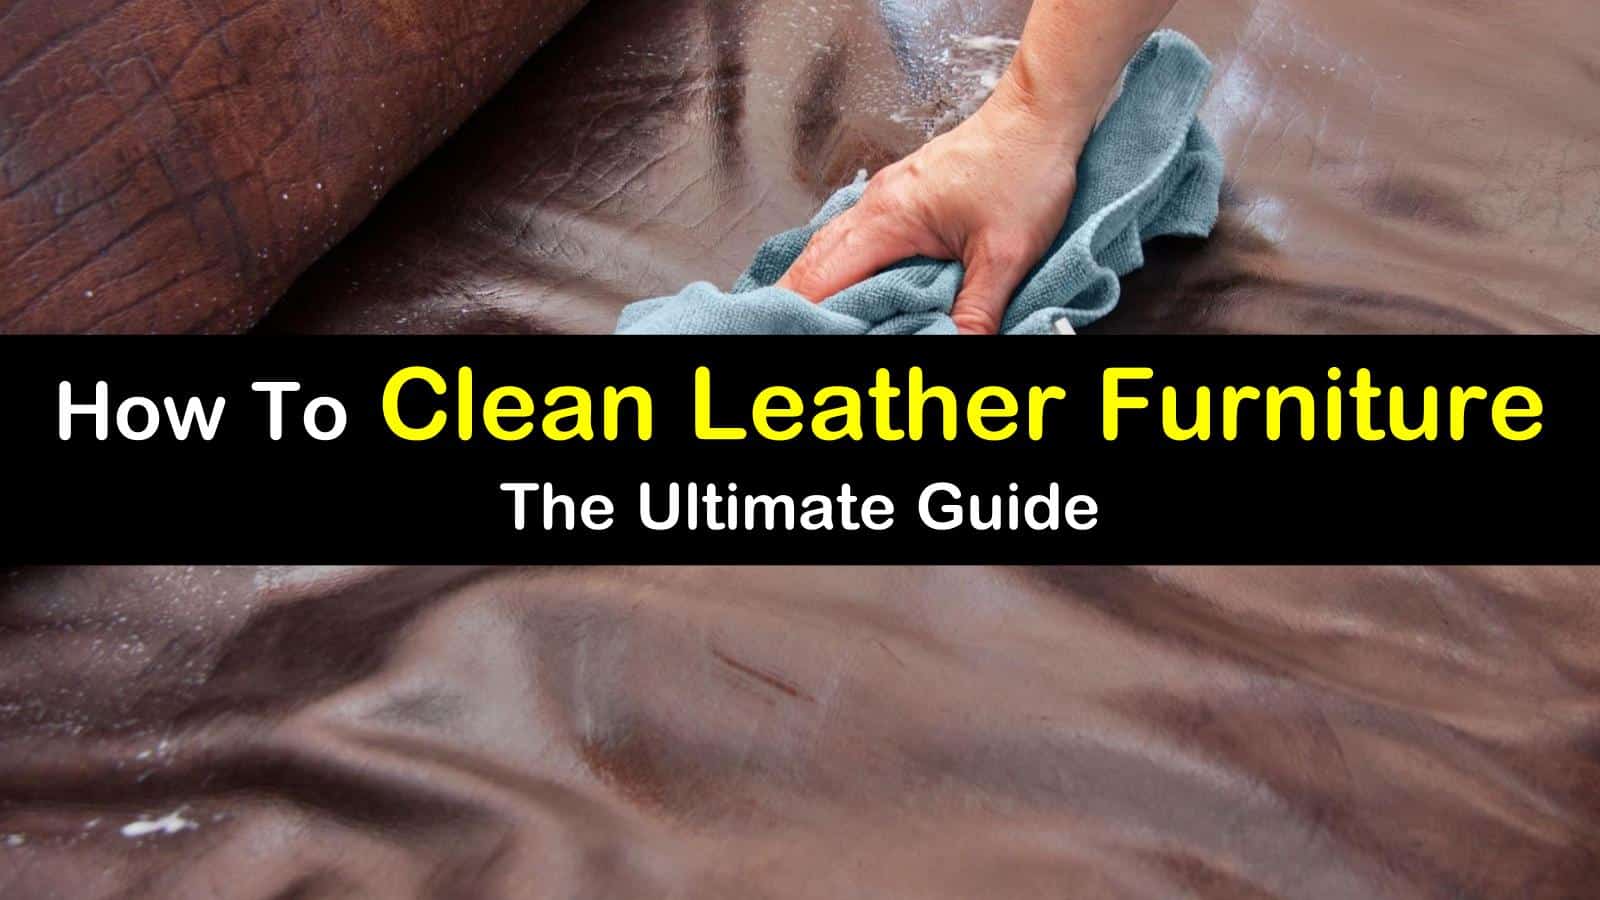 How To Clean Leather Furniture titleimg1